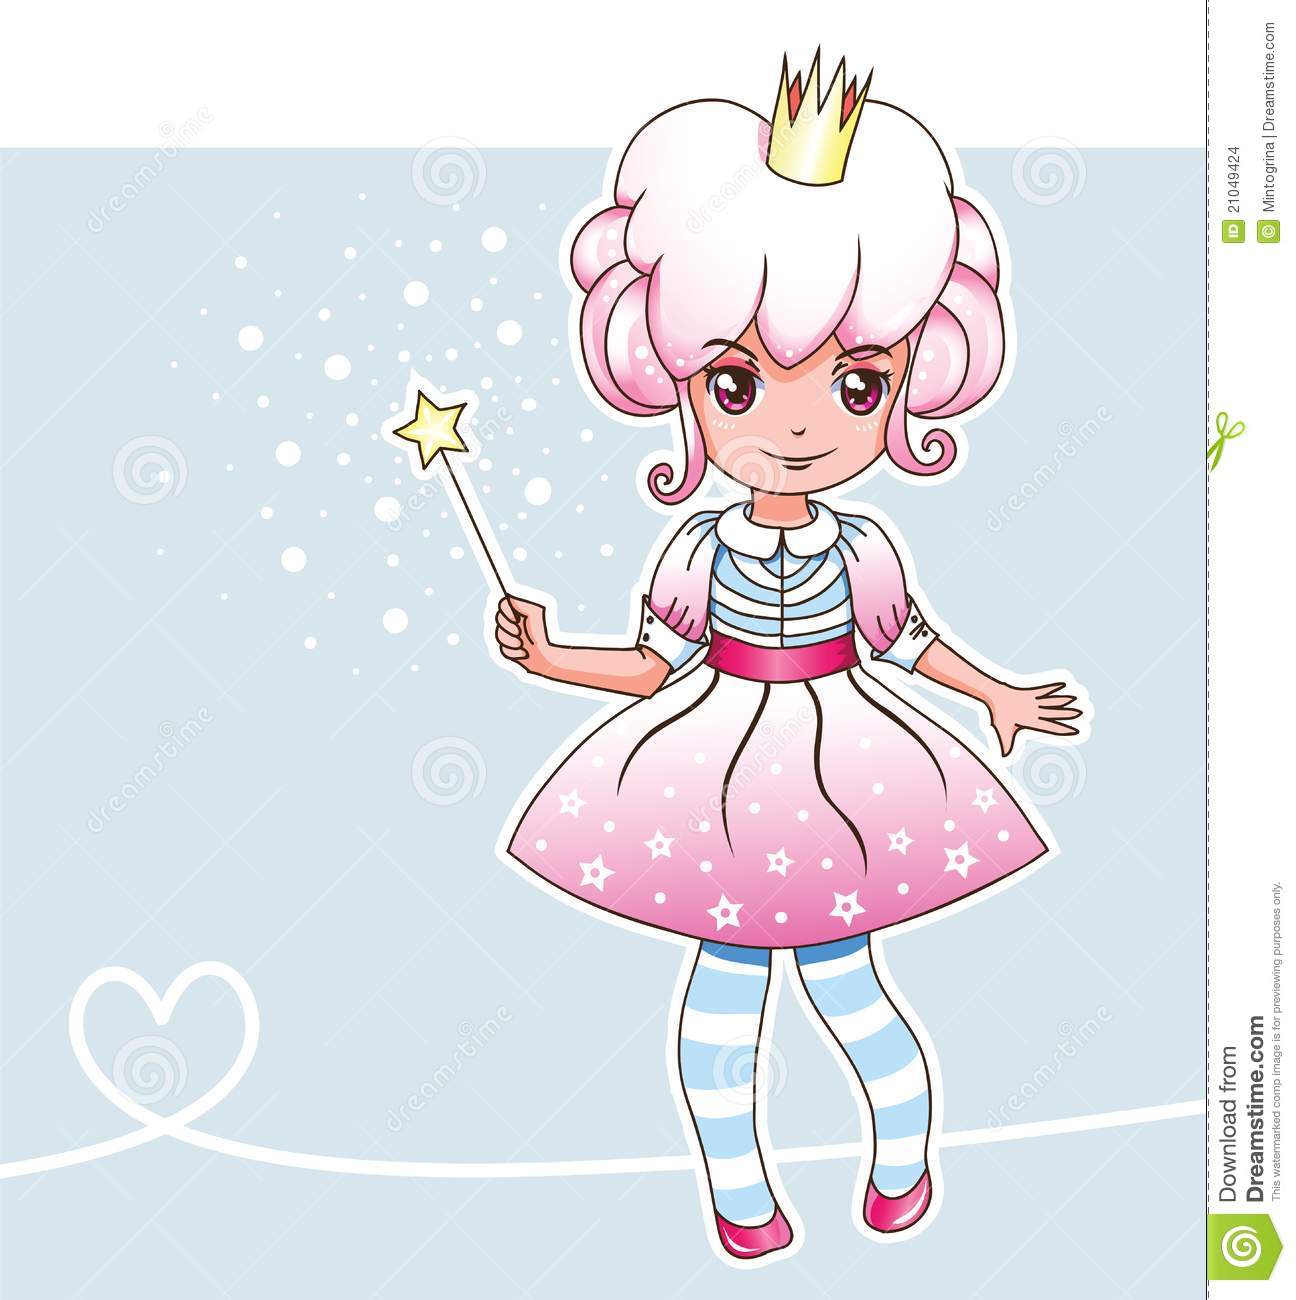 Sugar Plum Fairy With Magic Wand  Fairy Series 1  Stock Images   Image    